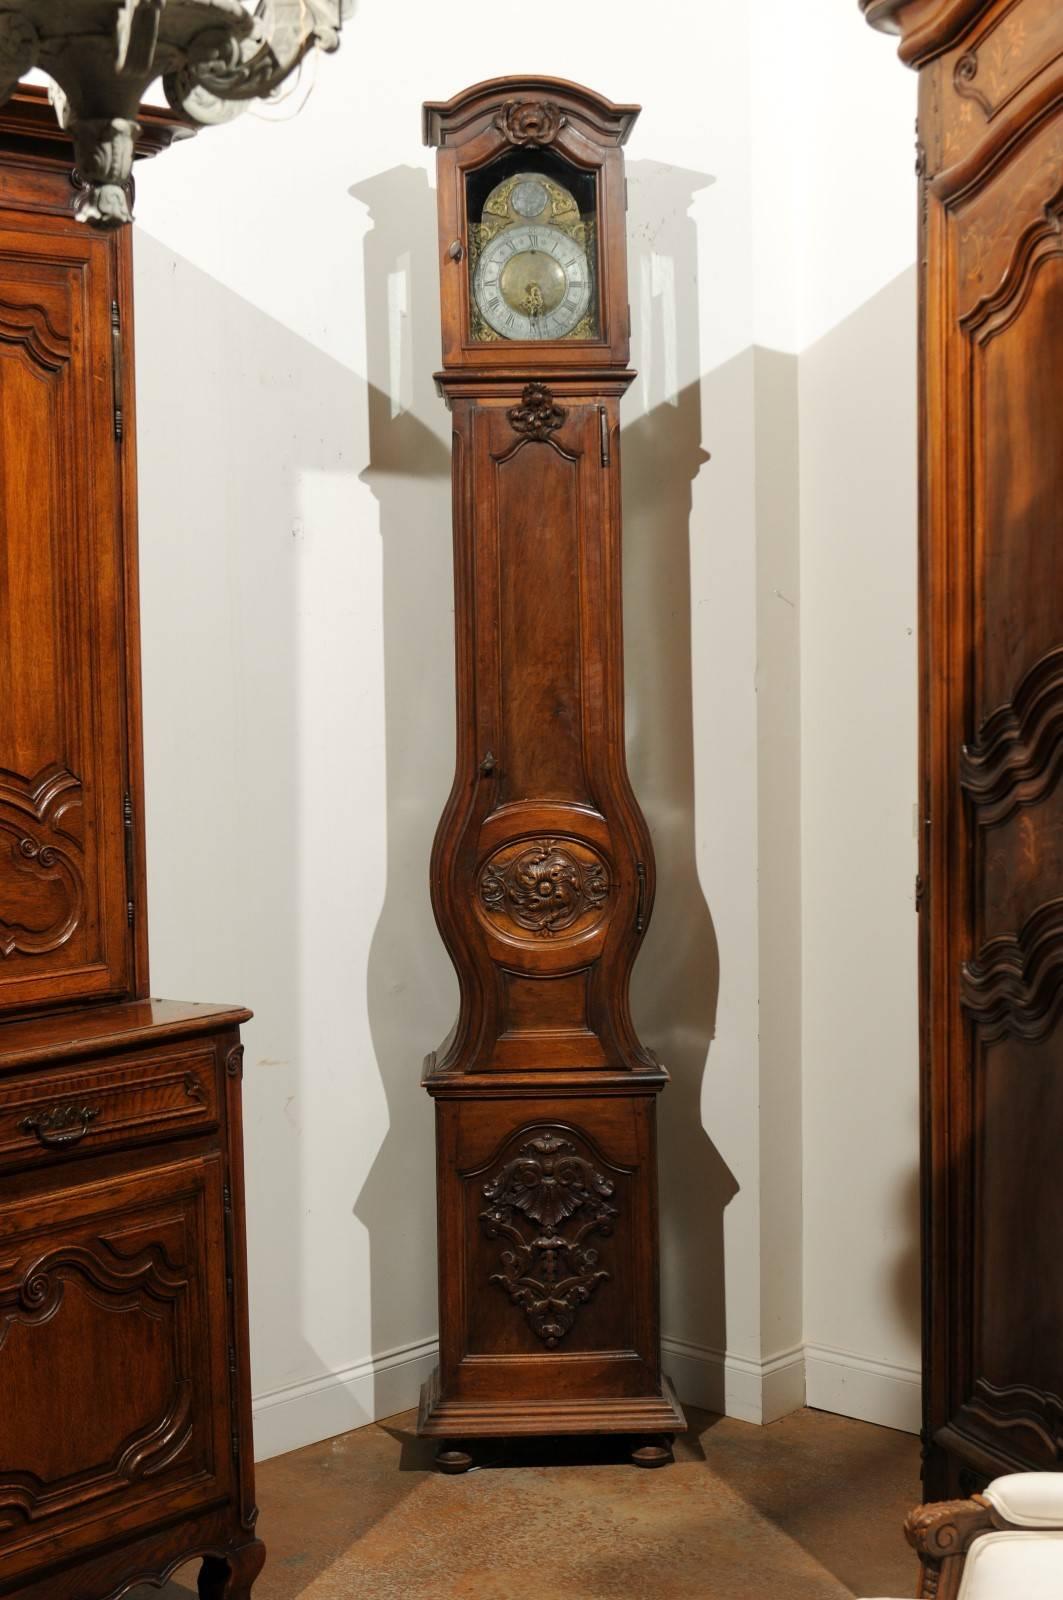 A French mid-18th century Louis XV period walnut longcase grandfather clock from the Rhône Valley. This French tall walnut clock features a rectangular head topped with a bonnet pediment surmounting a rocaille motif. The face is made of a